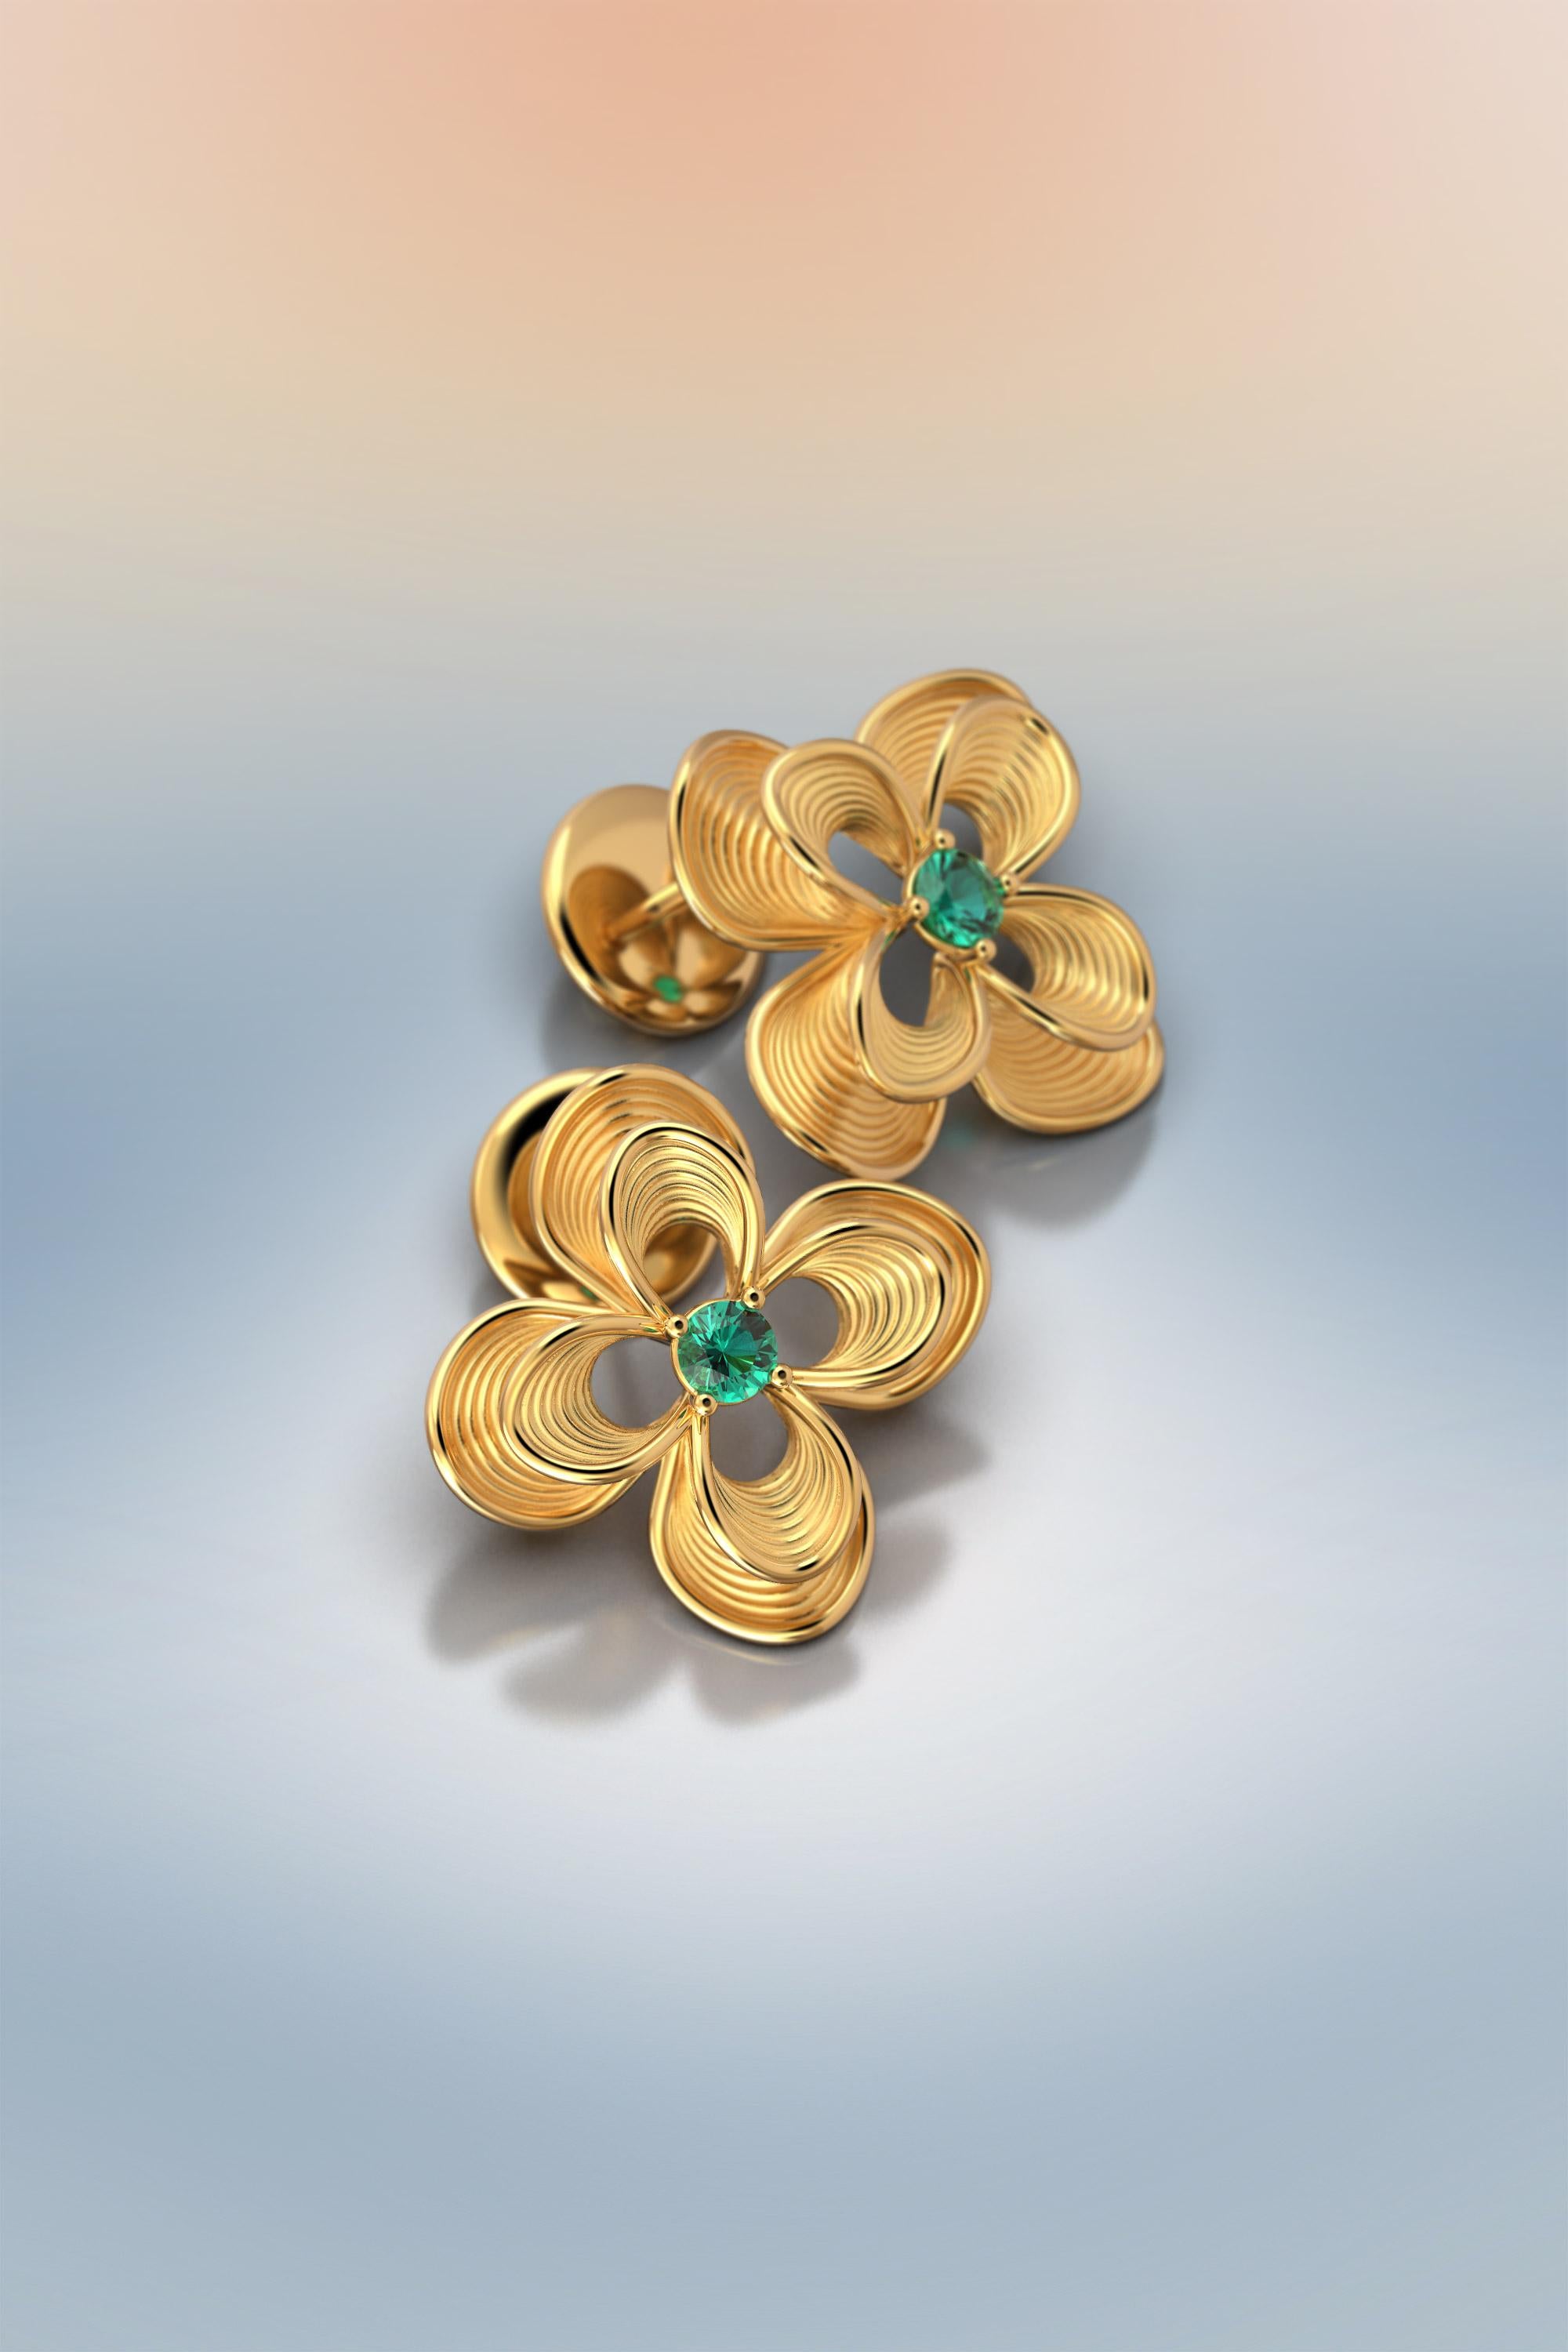 Contemporary Emerald Stud Earrings in 14k Gold | Italian Jewelry by Oltremare Gioielli For Sale